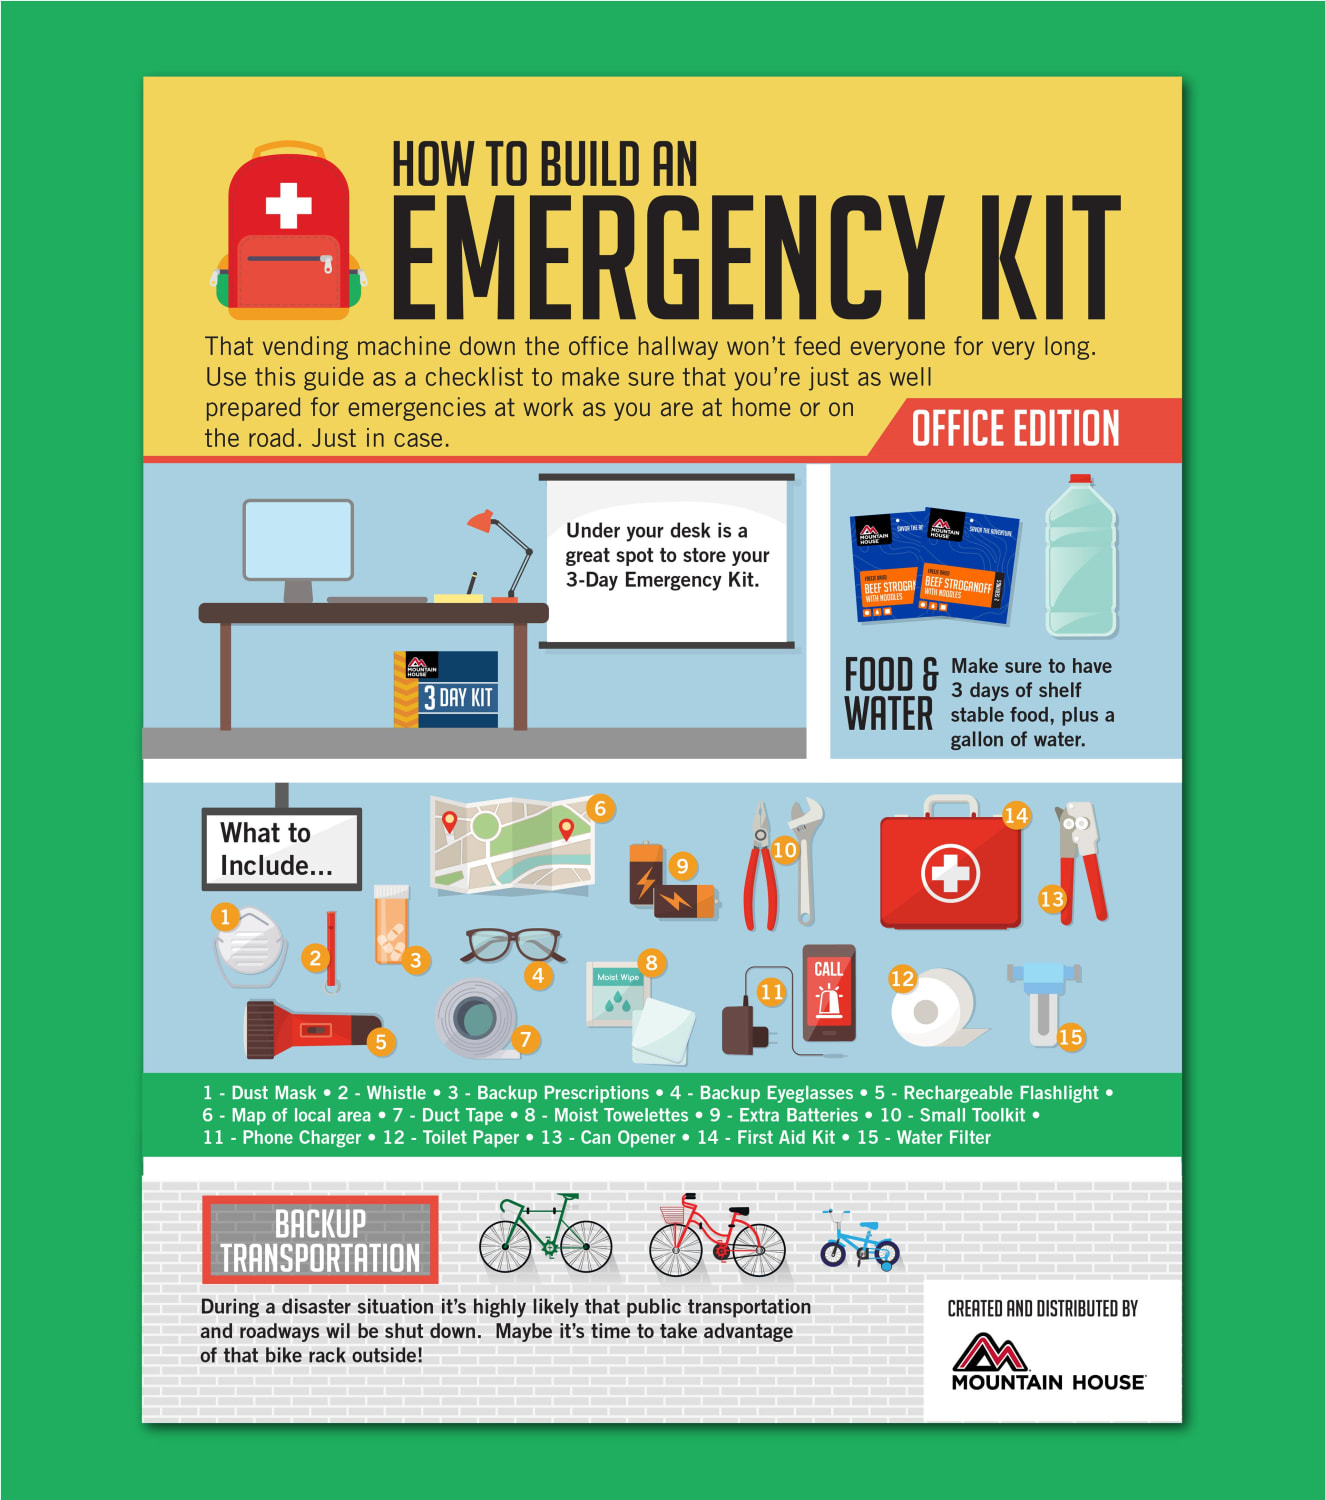 Guide: How to Build An Emergency Kit - Office Edition